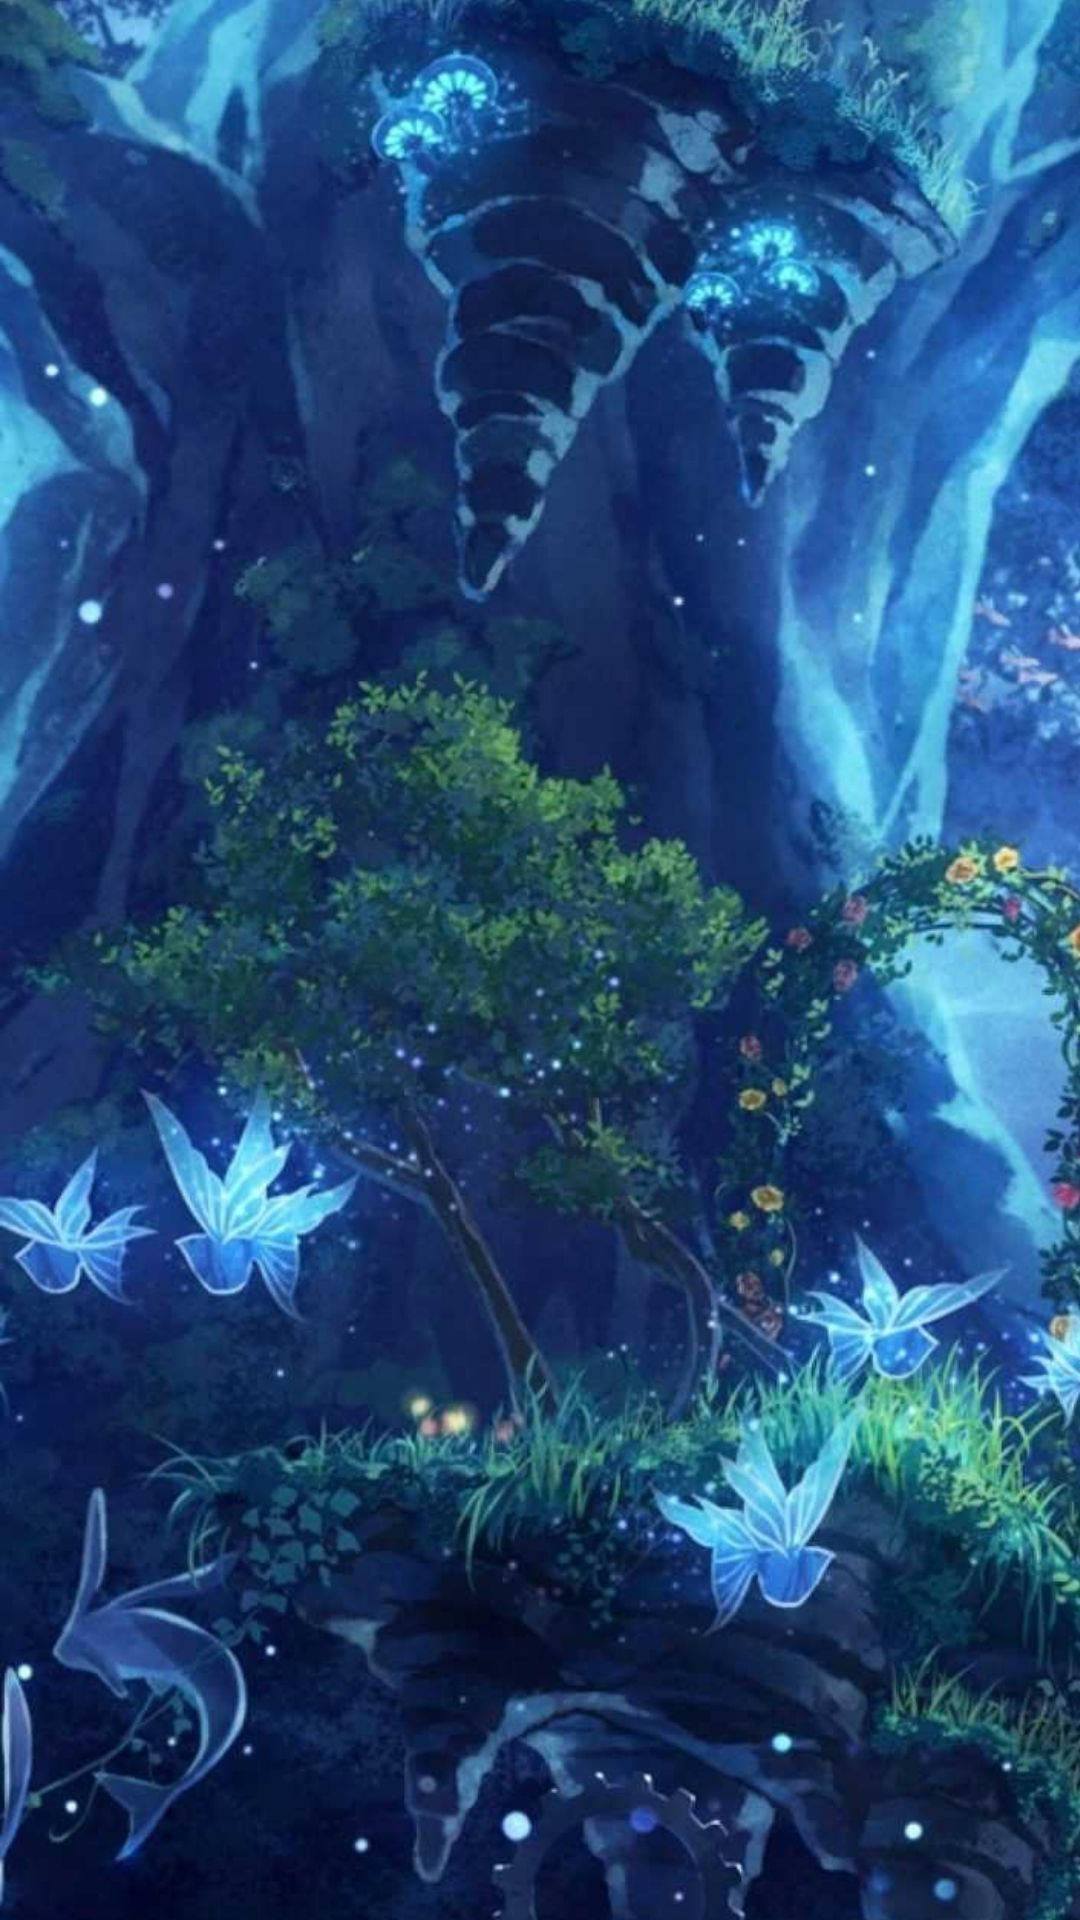 A magical forest wallpaper for iPhone and Android devices - Magic